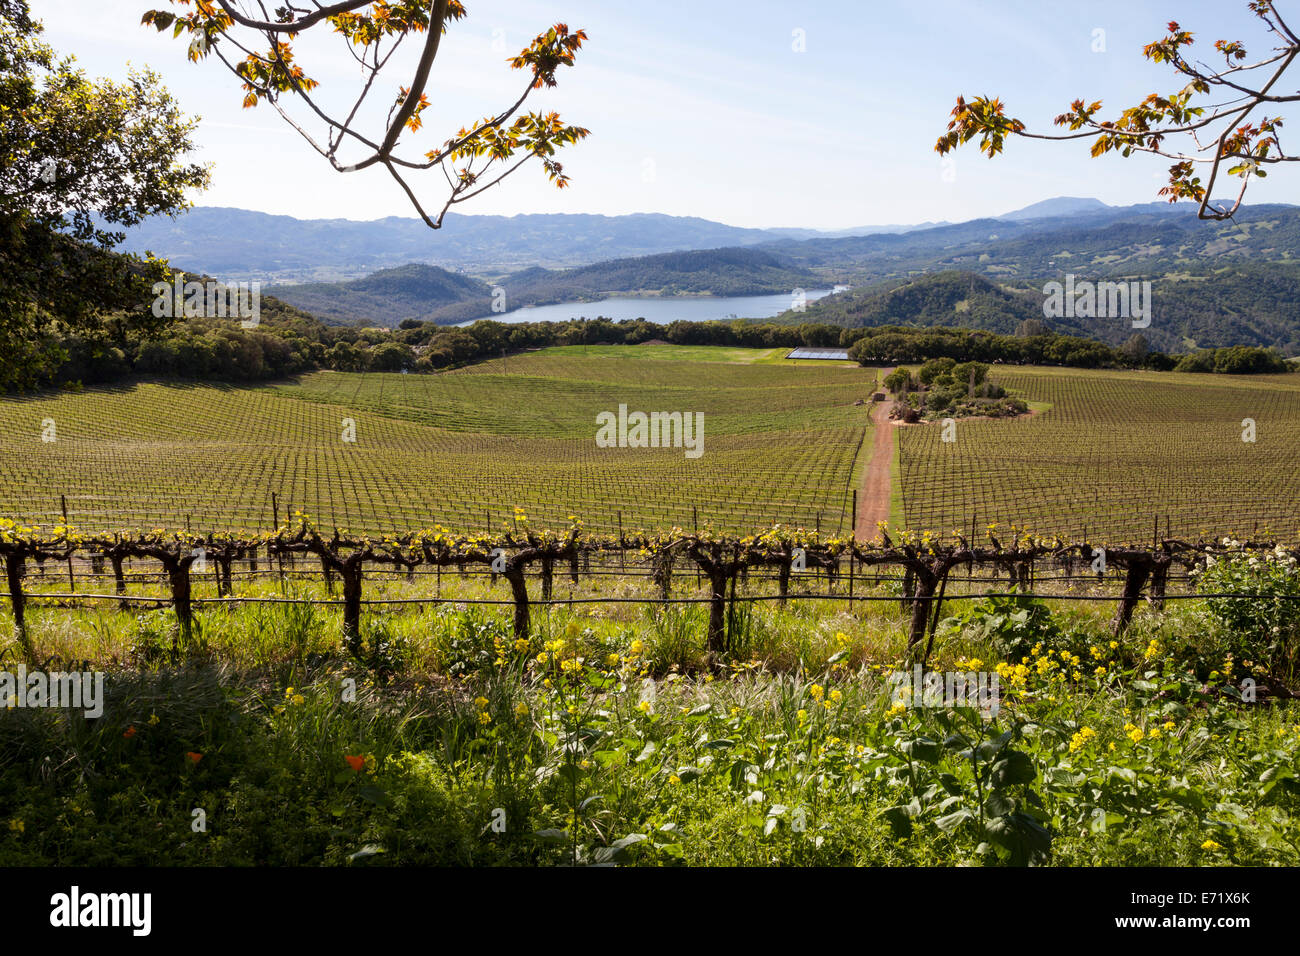 Lake Hennessey viewed from Continuum Estate, Napa Valley, California, USA Stock Photo